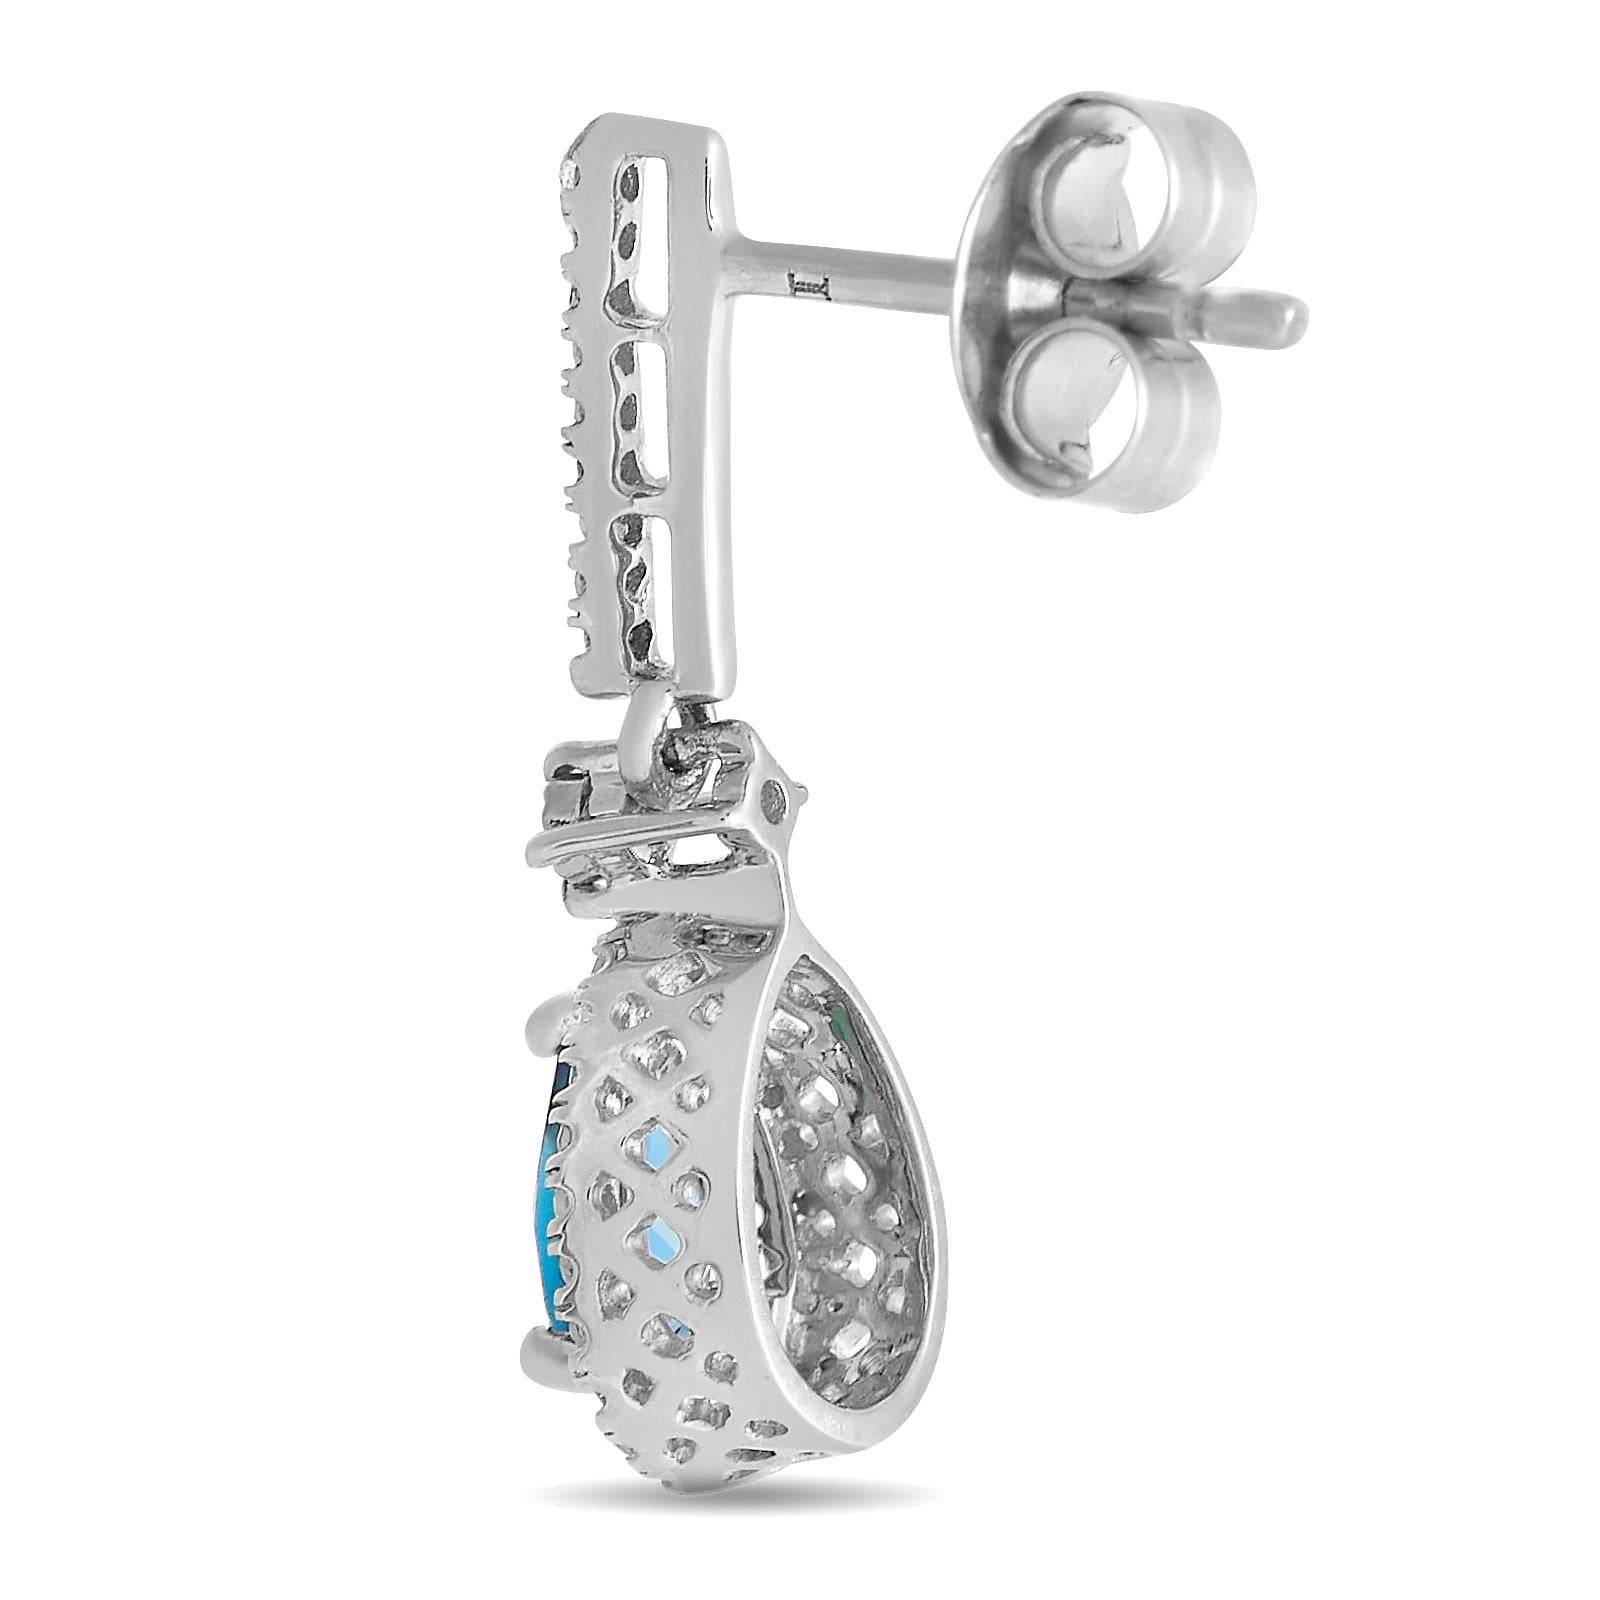 Breathtaking blue topaz gemstones make a statement on these impeccably crafted earrings. Each one features an intricate 14K white gold setting measuring 0.80” long by 0.25” wide. Together, they feature inset diamonds with a total weight of 0.20